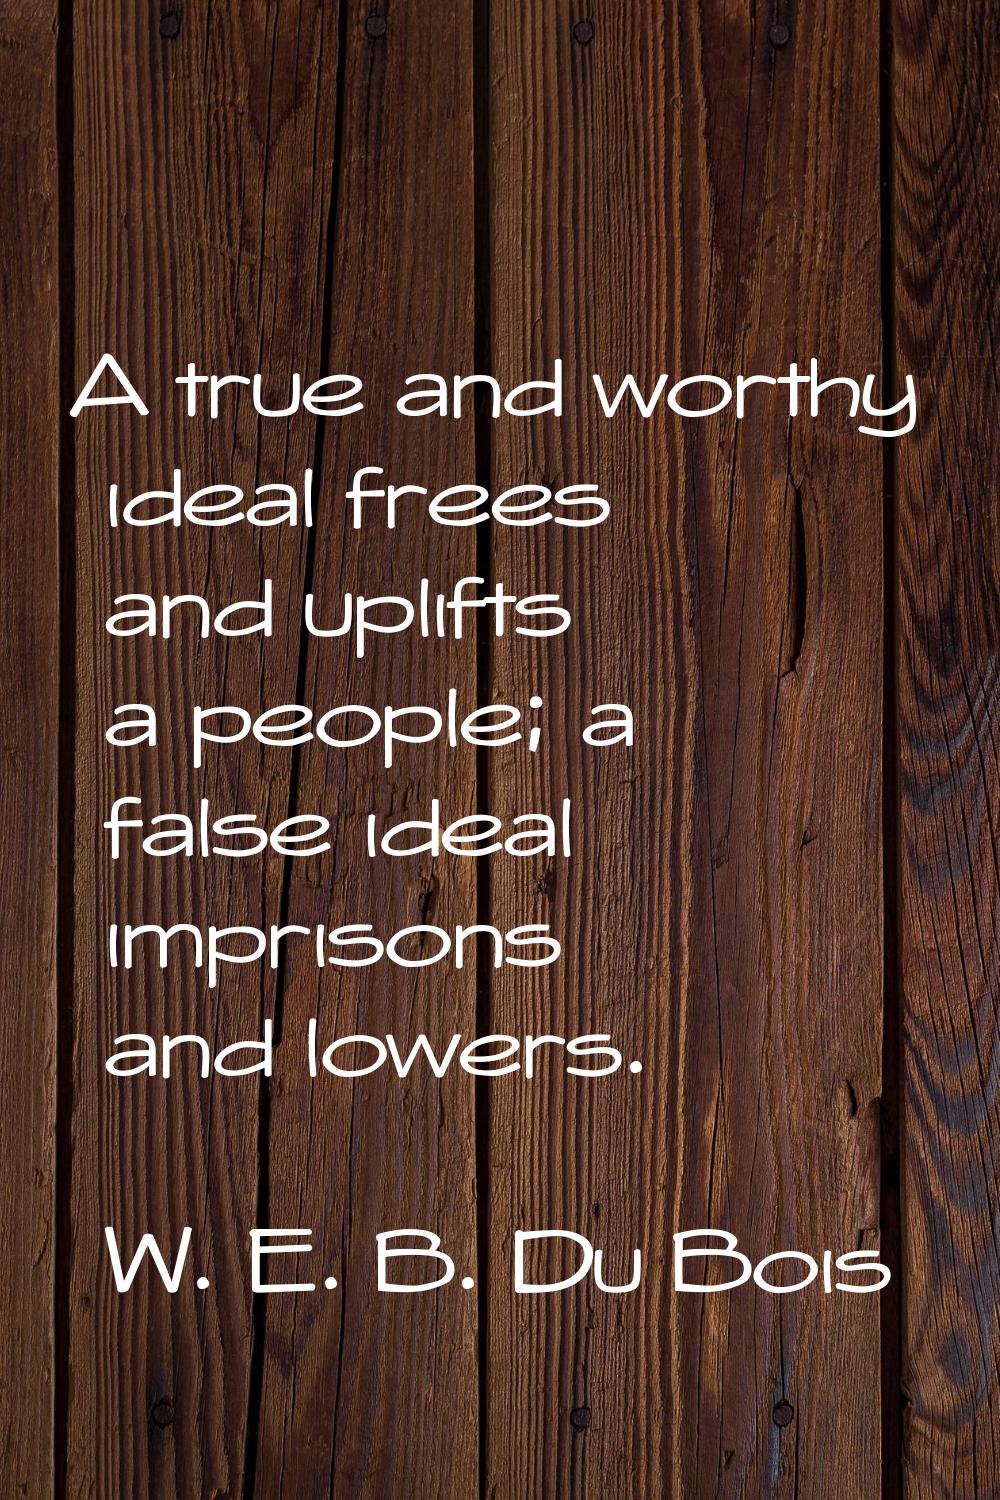 A true and worthy ideal frees and uplifts a people; a false ideal imprisons and lowers.